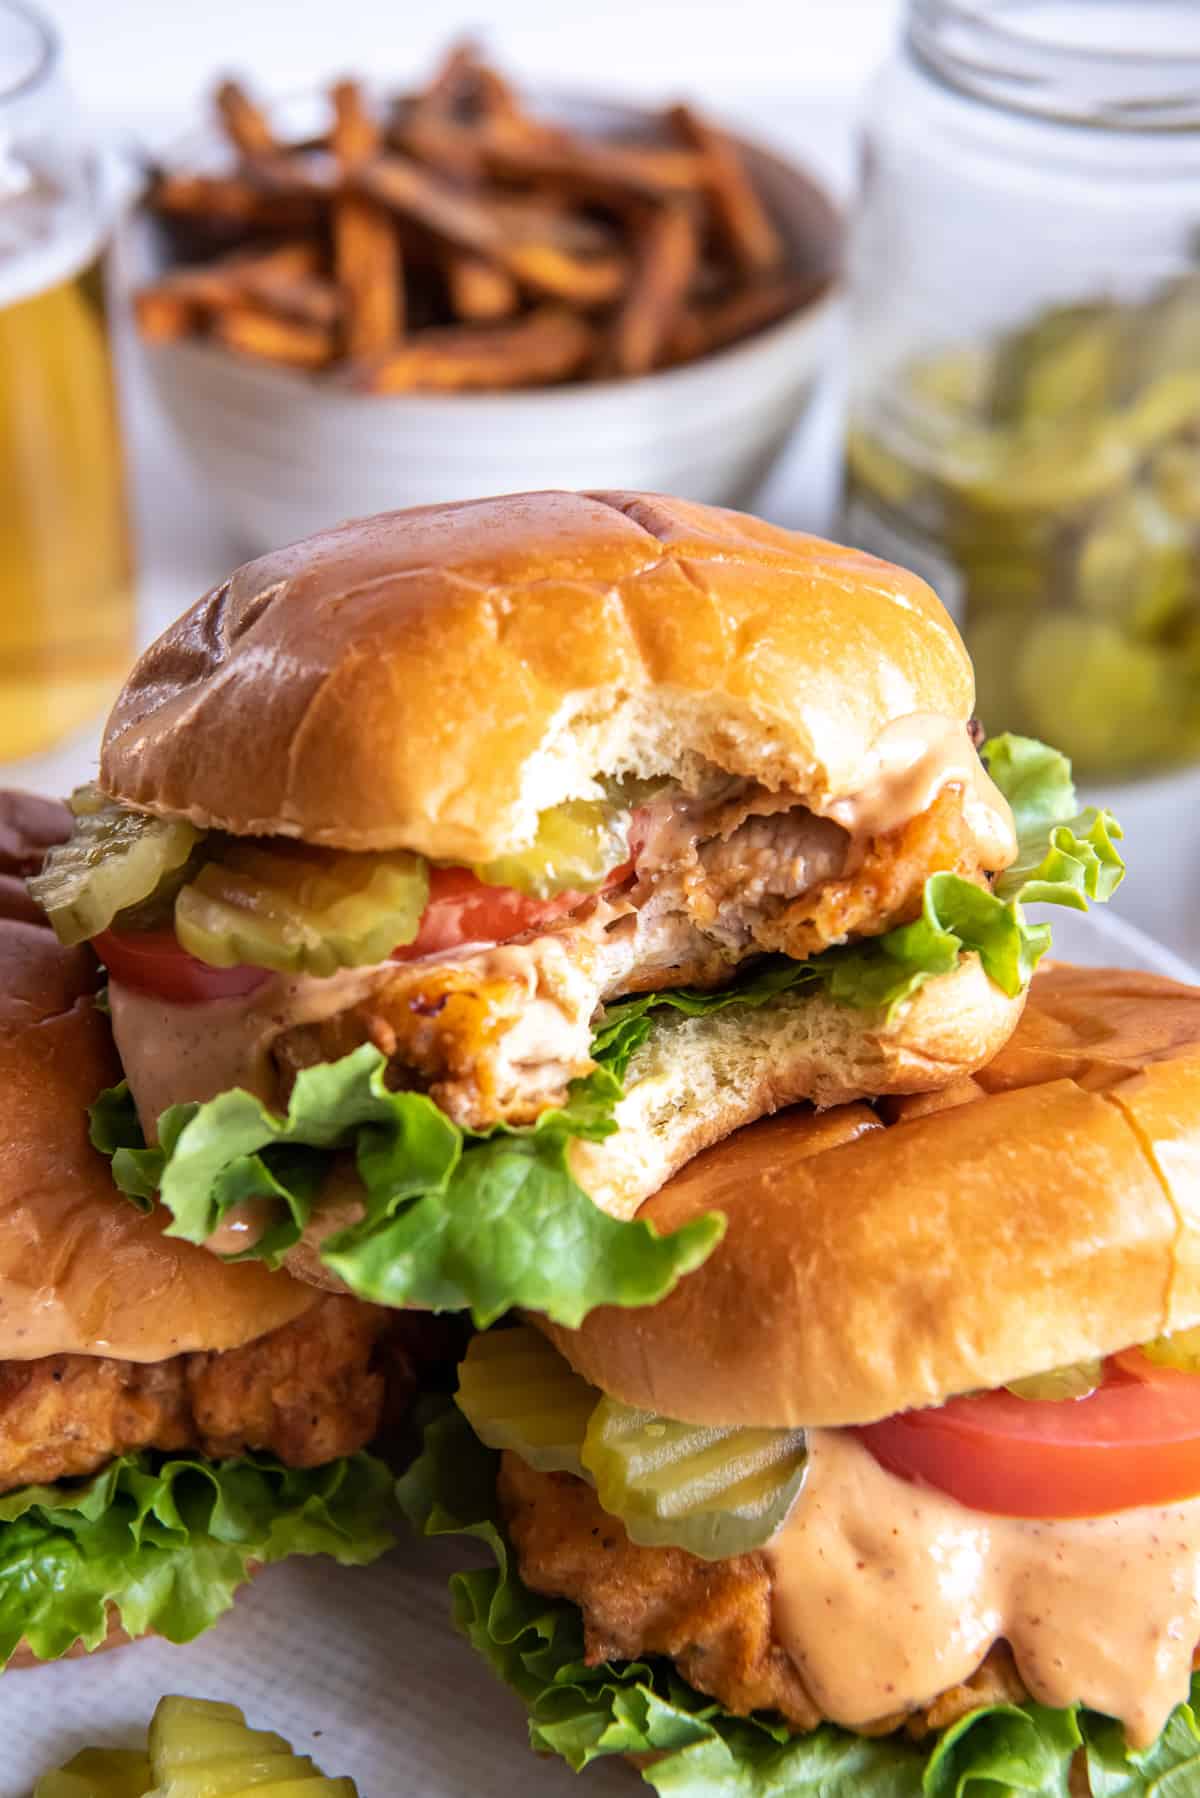 A crispy chicken sandwich on a brioche bun with a bite missing stacked on top of two others.